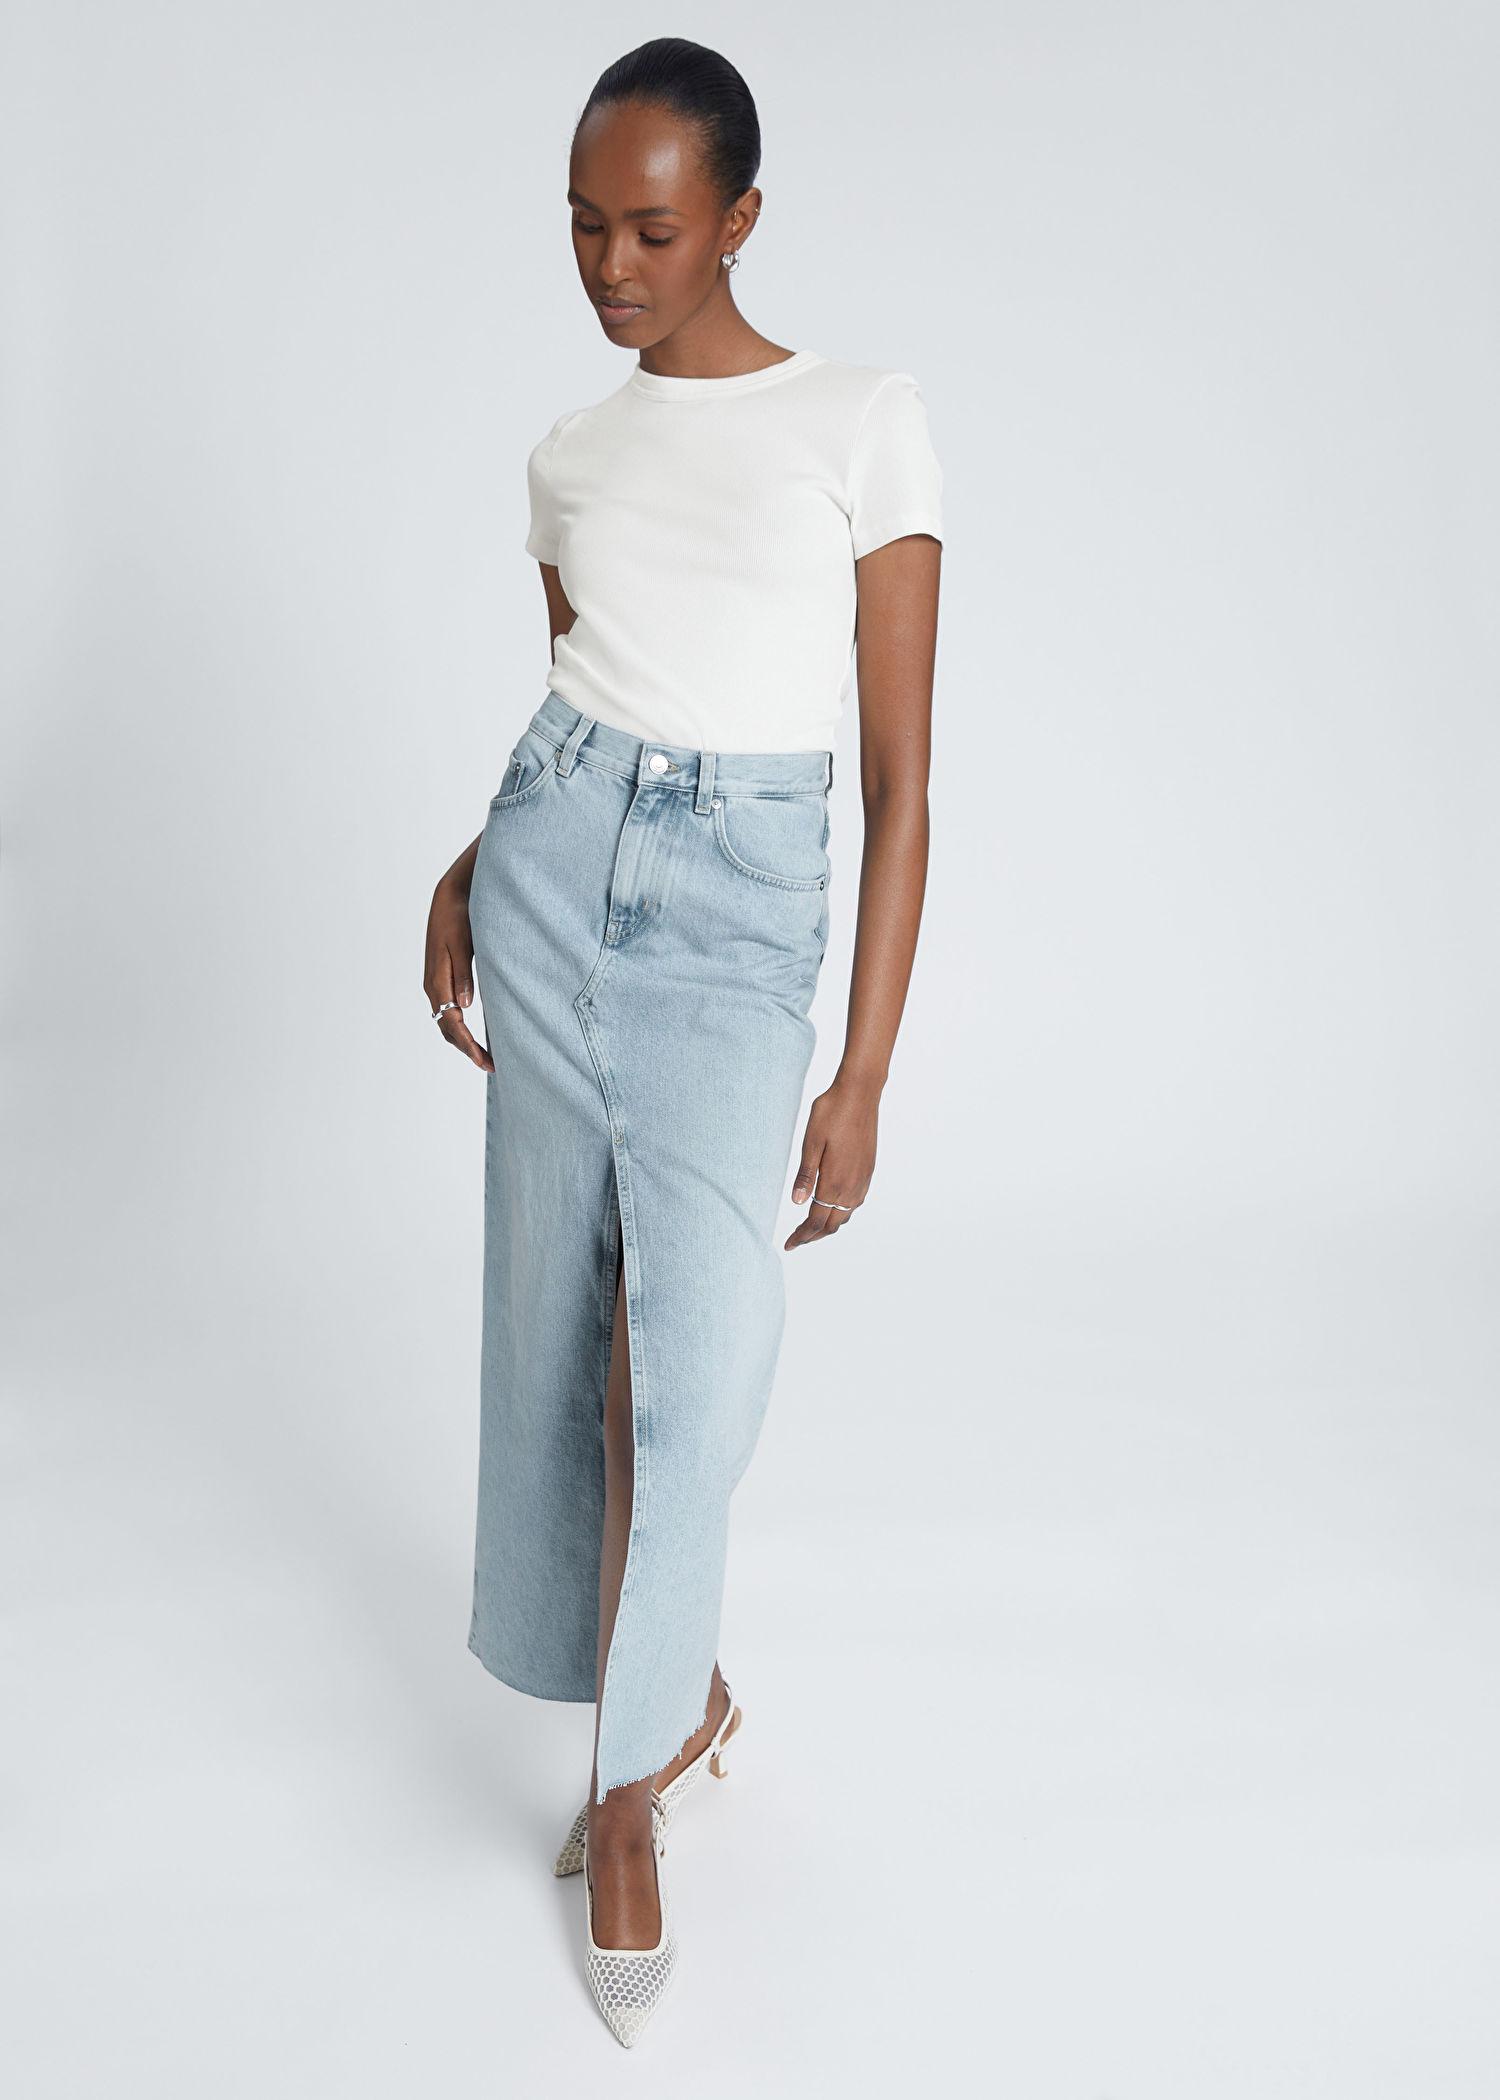 & Other Stories Long Frayed Edge Denim Skirt in Blue | Lyst Canada